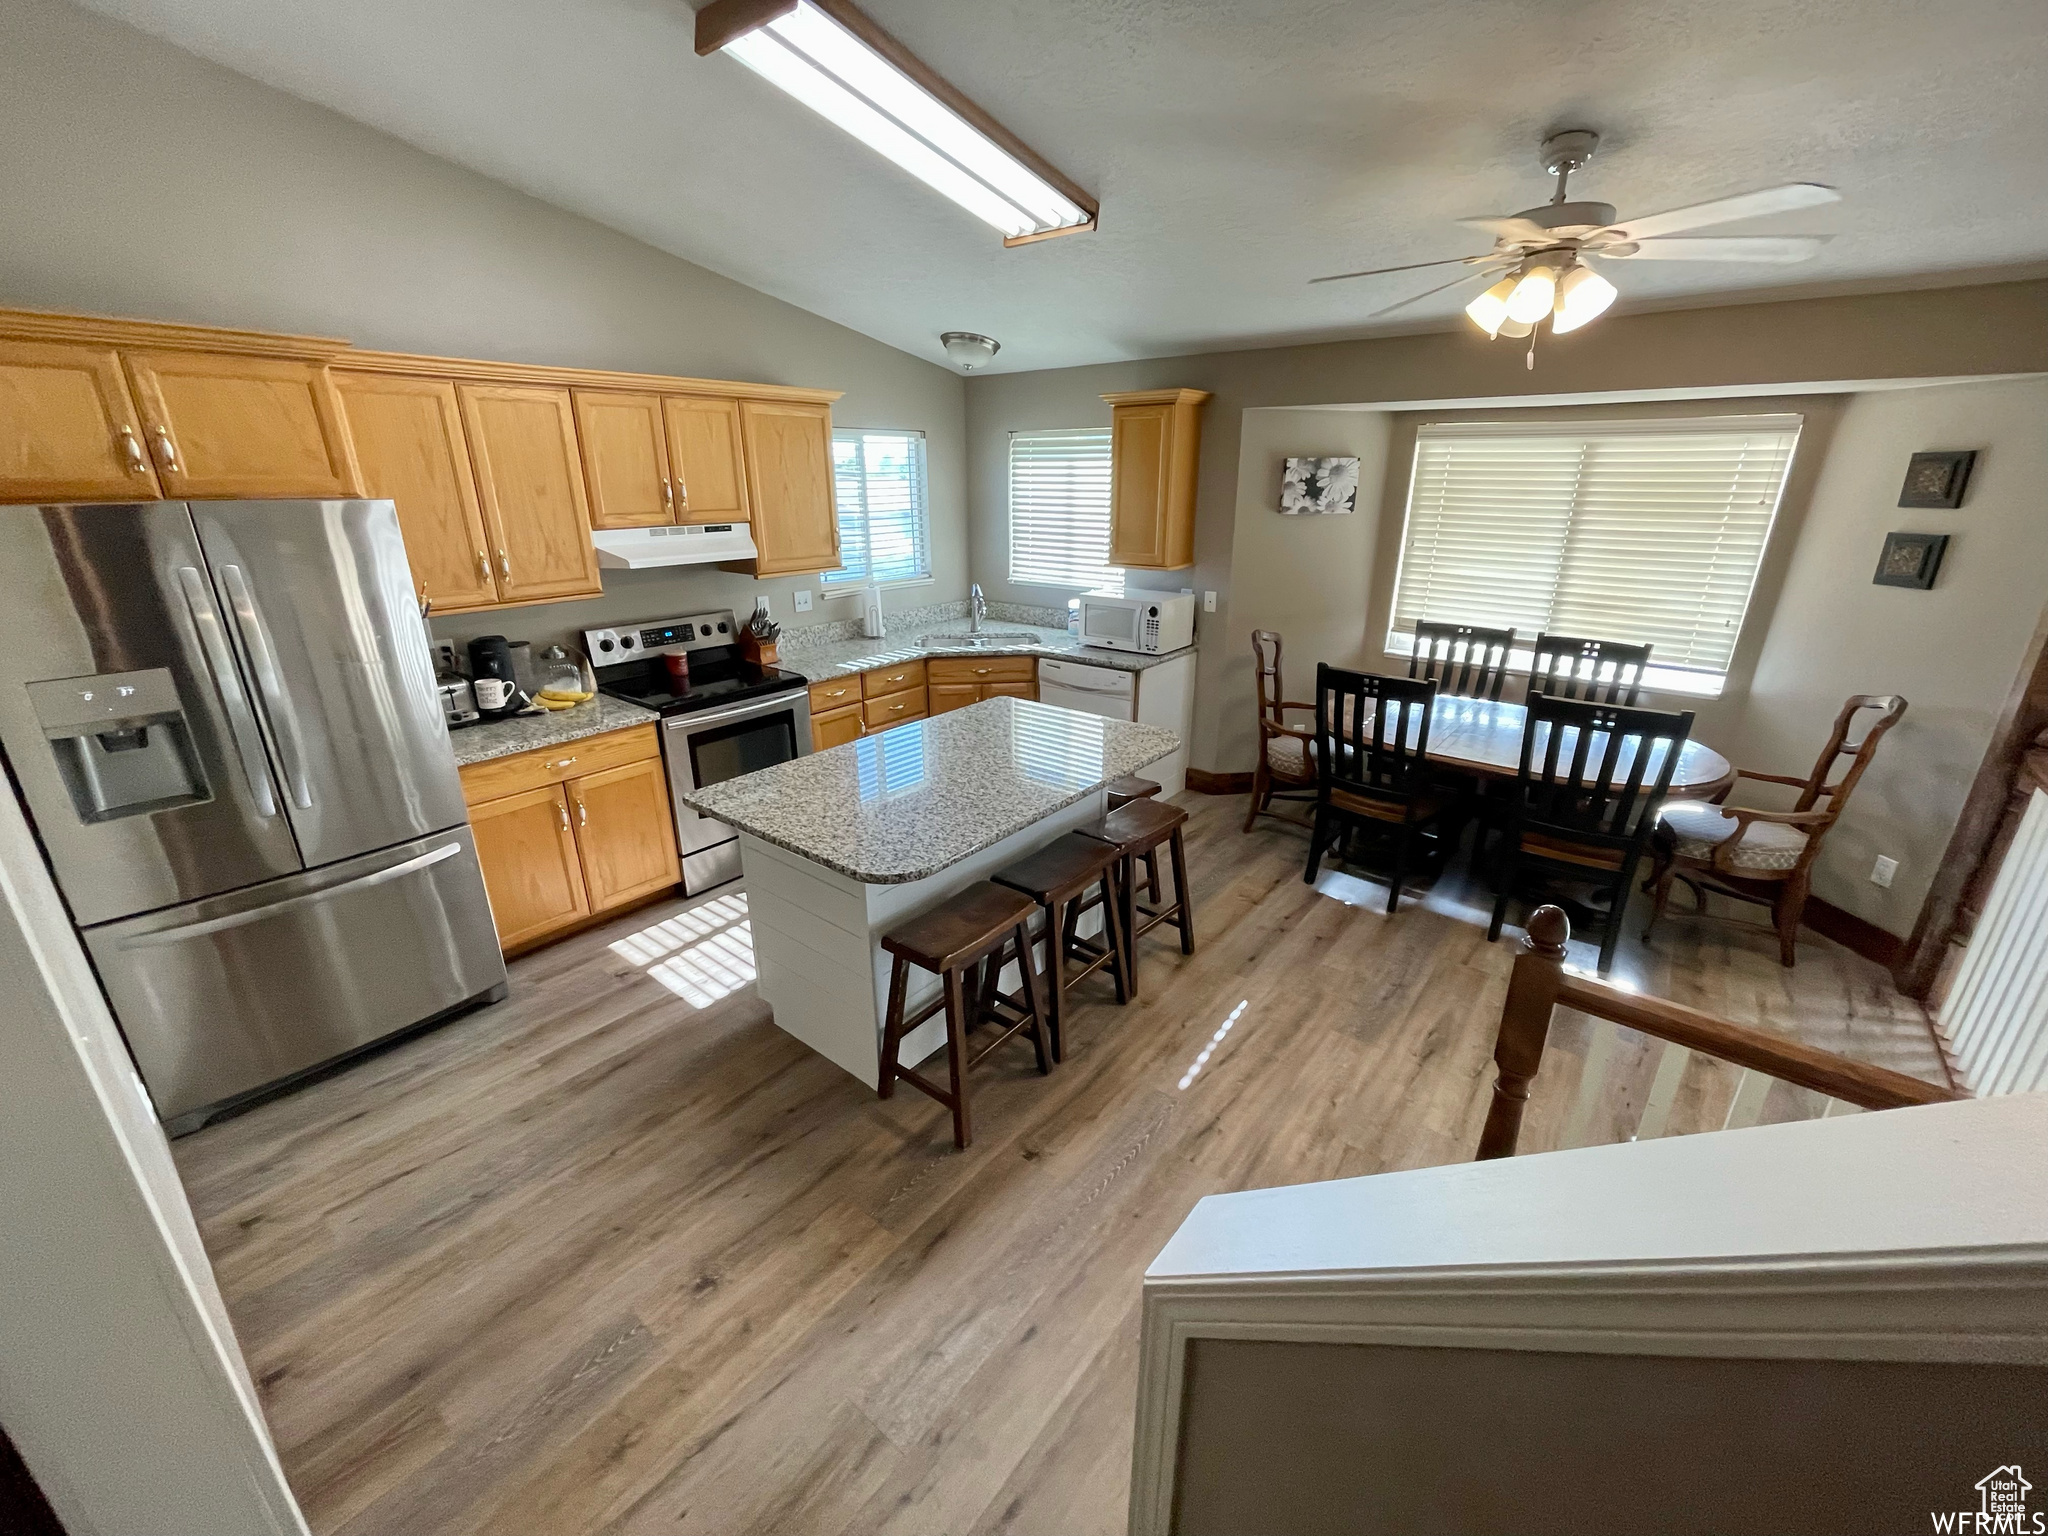 Kitchen featuring a center island, light hardwood / wood-style flooring, stainless steel appliances, ceiling fan, and lofted ceiling